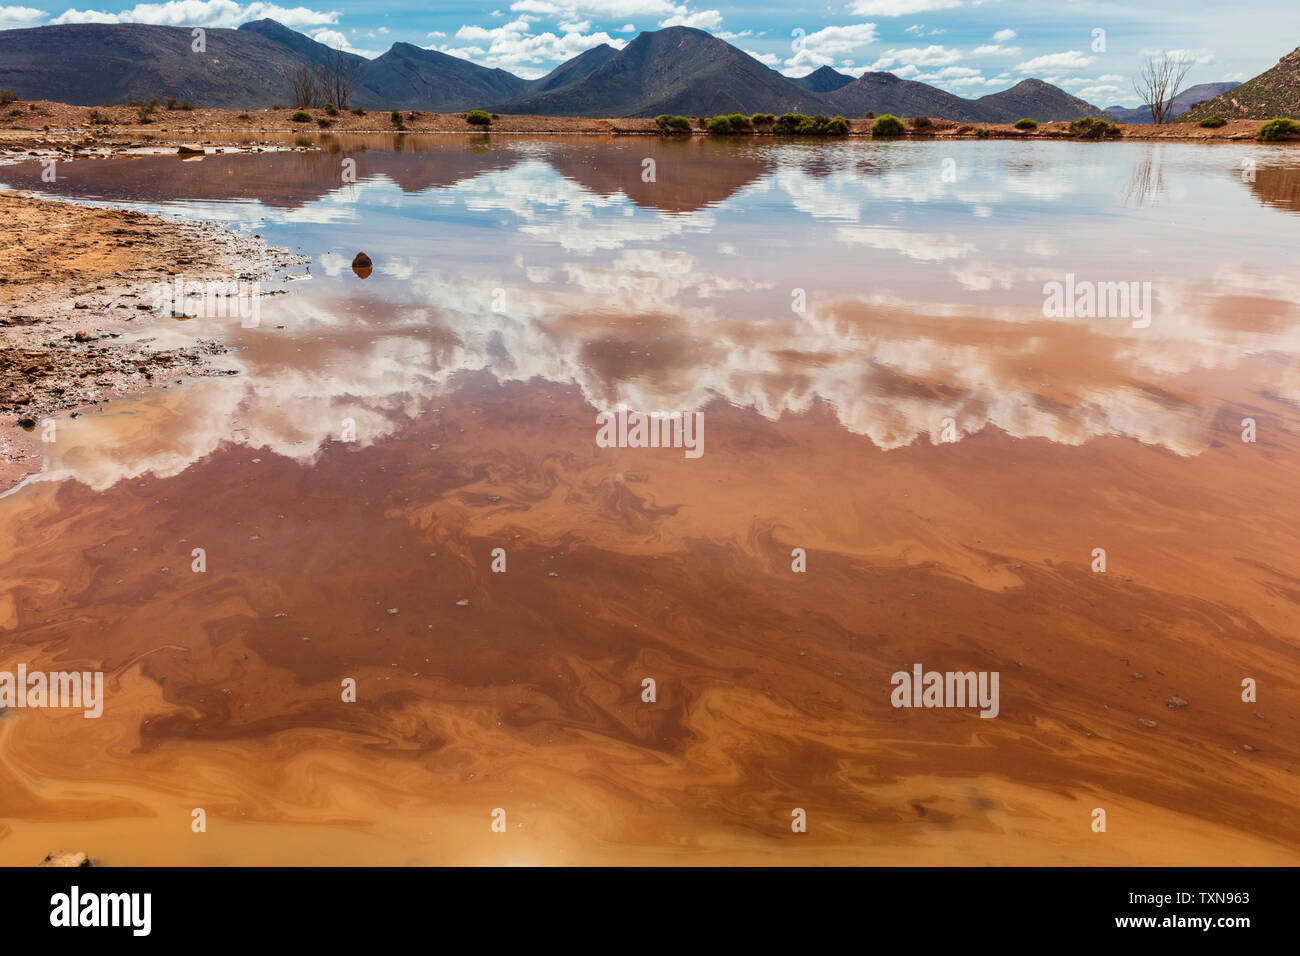 Reflection of cloudscape in lake, mountain ranges in background, Cape Town, Western Cape, South Africa Stock Photo